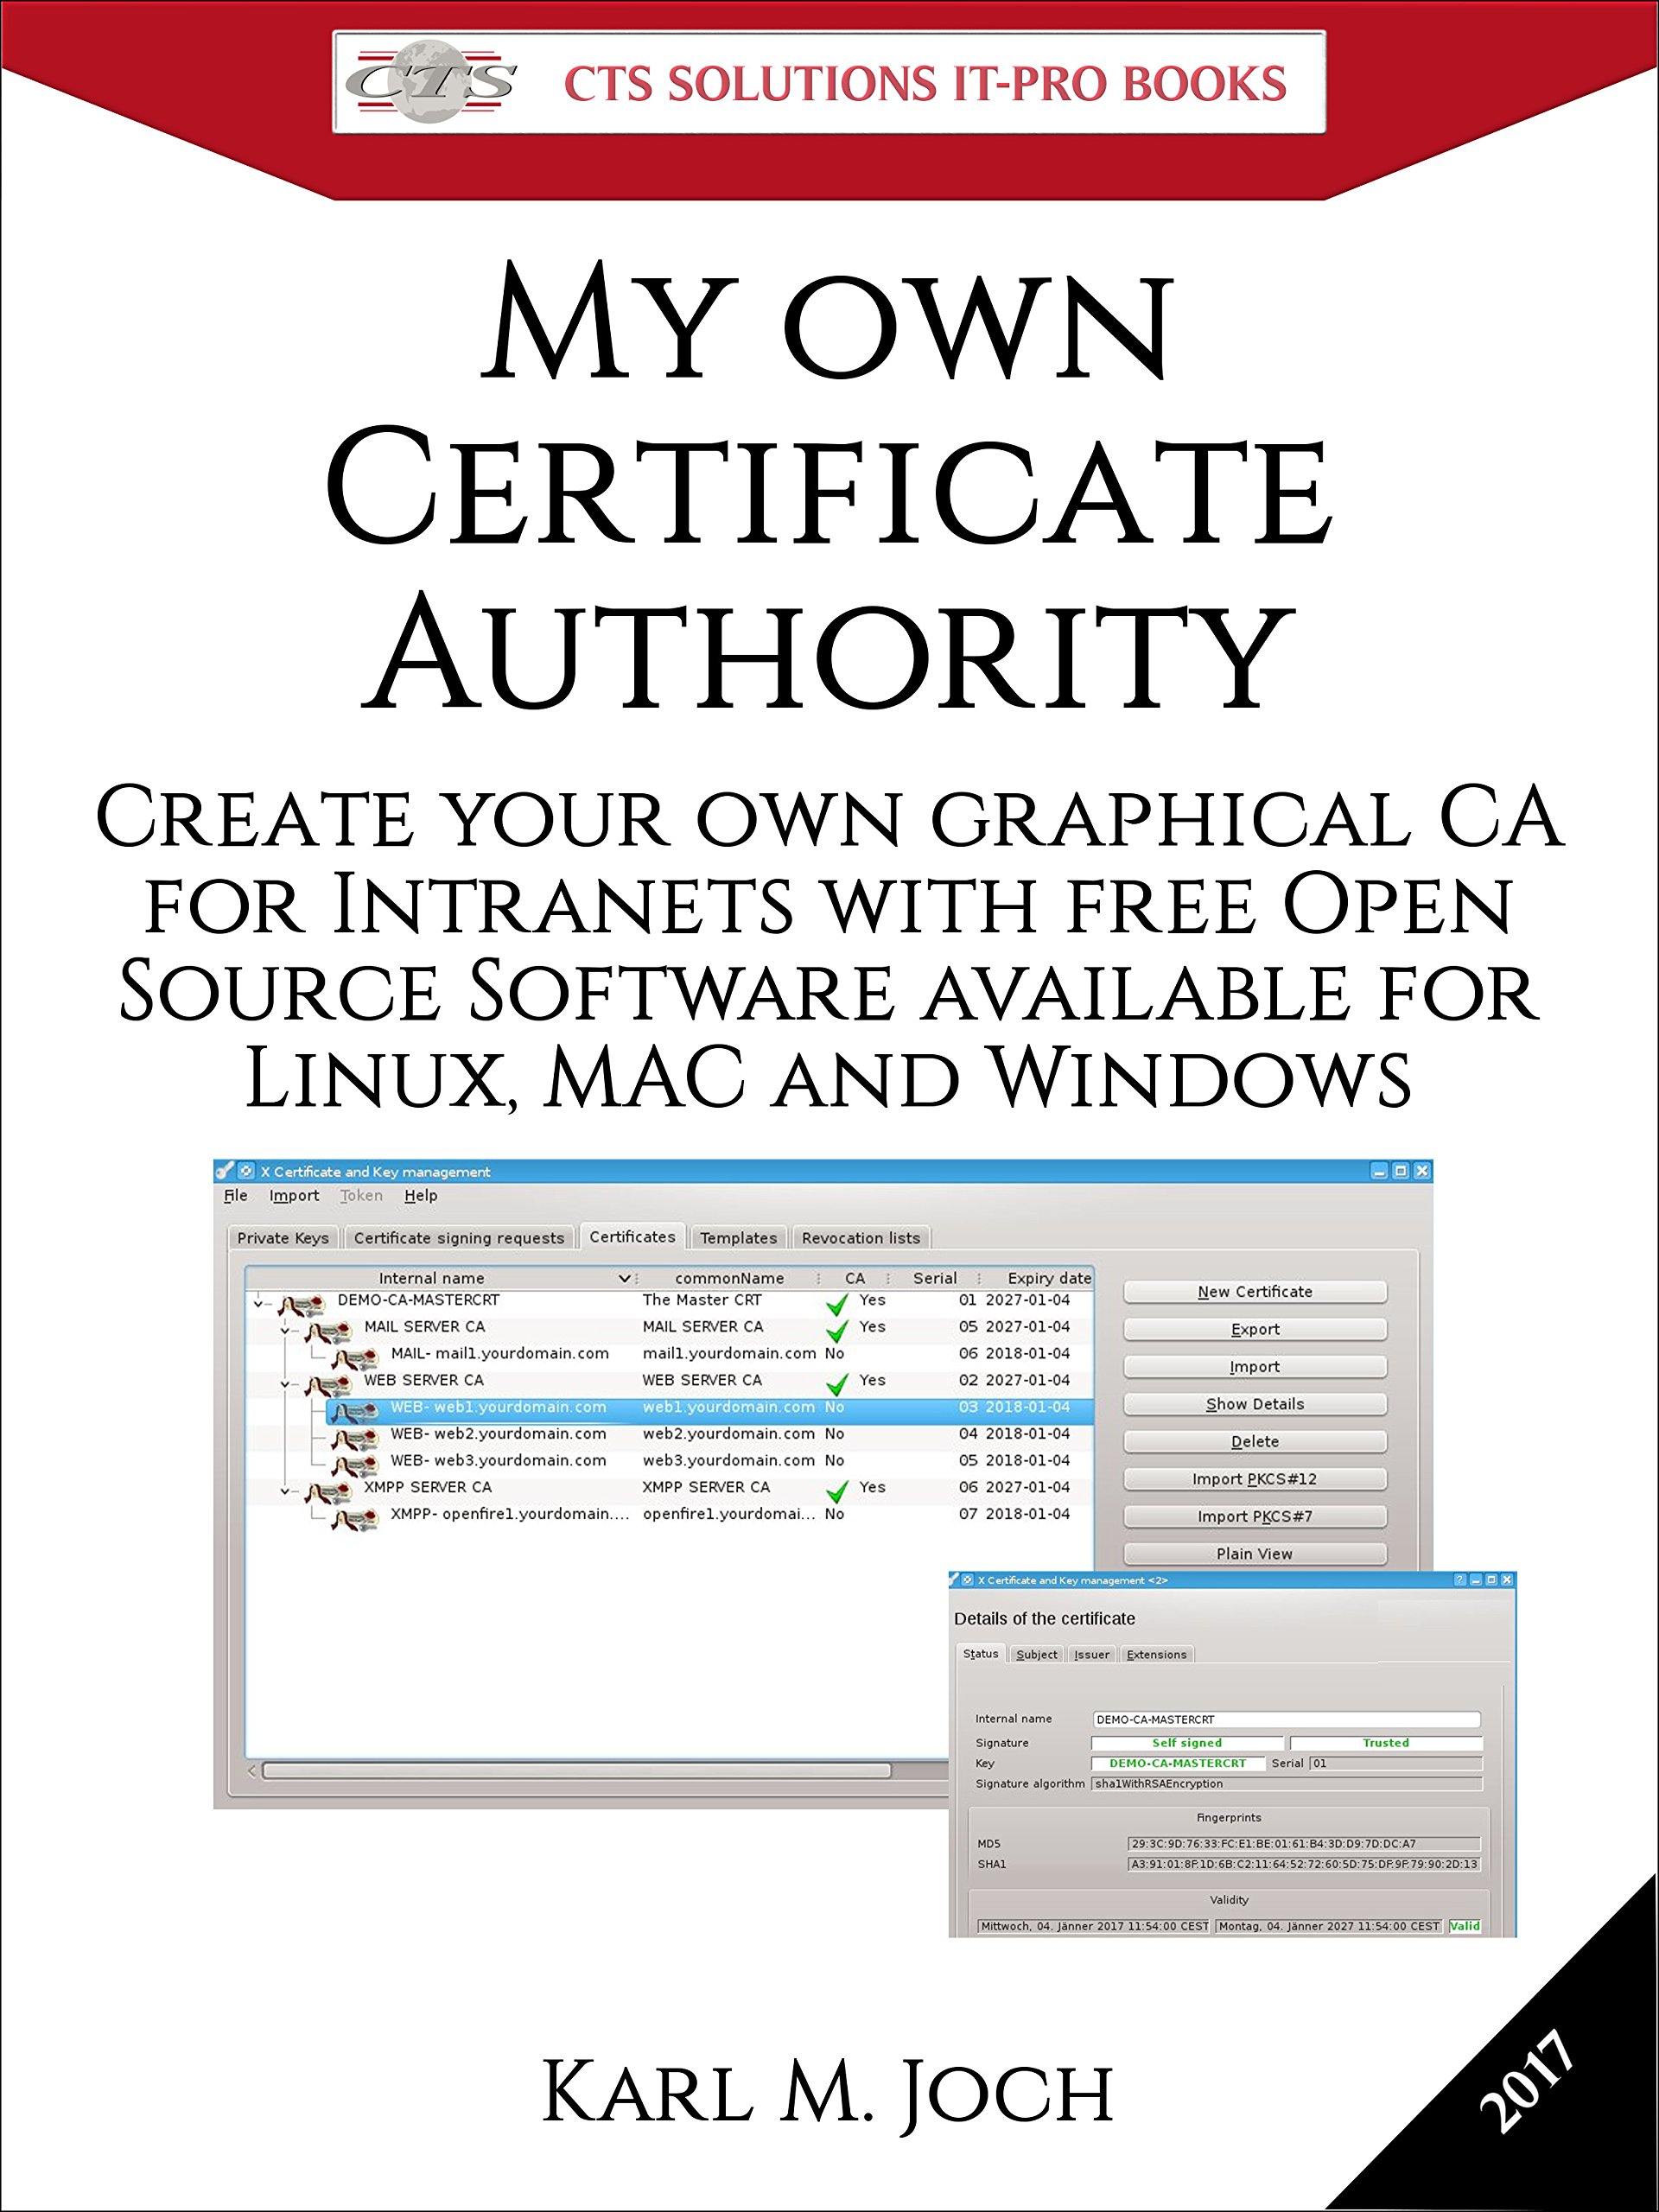 My own Certificate Authority: Create your own graphical CA for Intranets with Open Source Software for Windows, Linux and MAC (CTS SOLUTIONS IT-PRO E-Books Book 1)